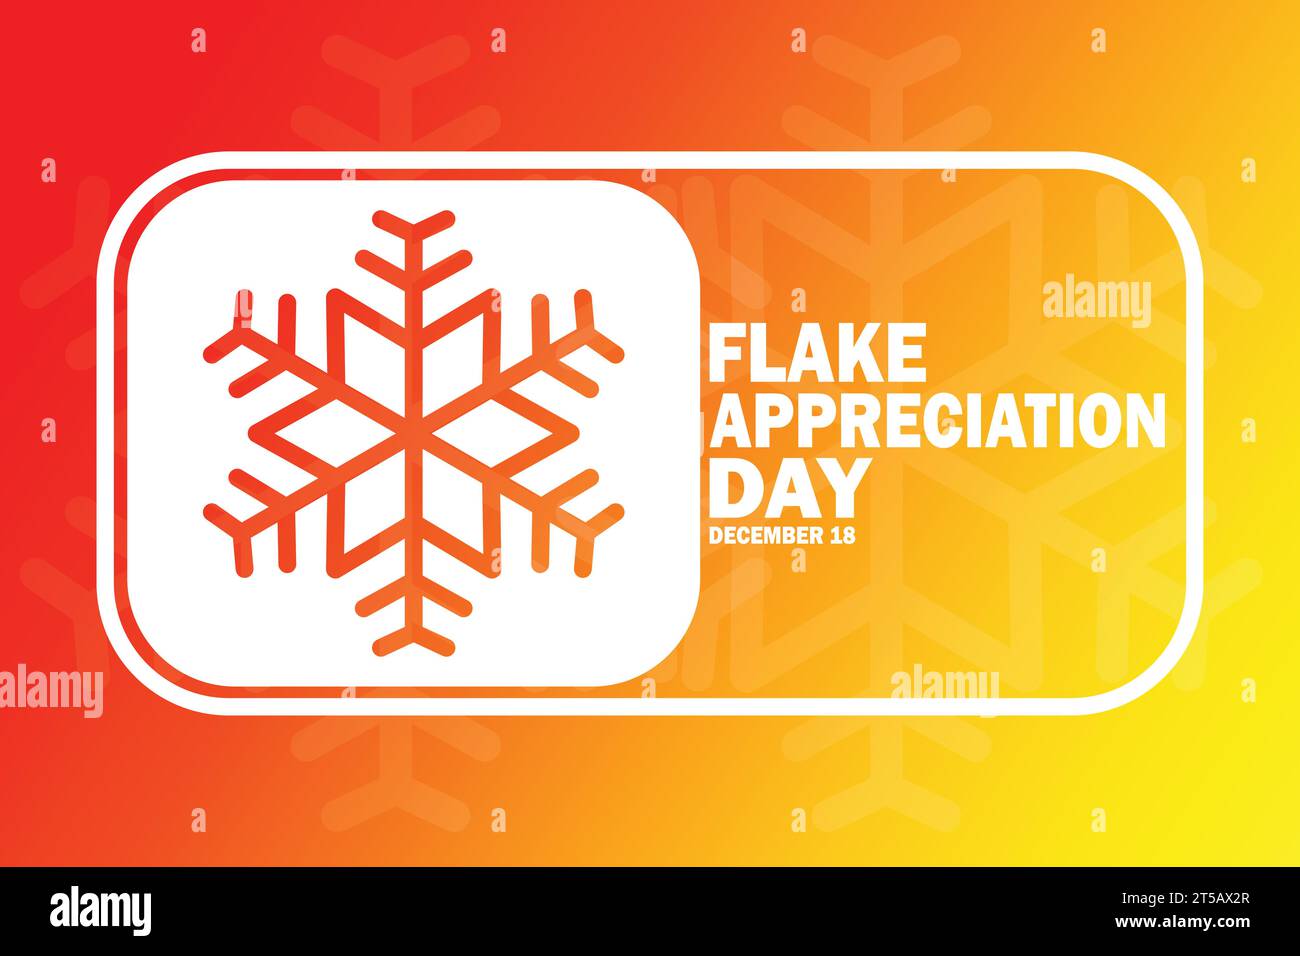 Flake Appreciation Day. Vector illustration. December 18. Suitable for greeting card, poster and banner Stock Vector